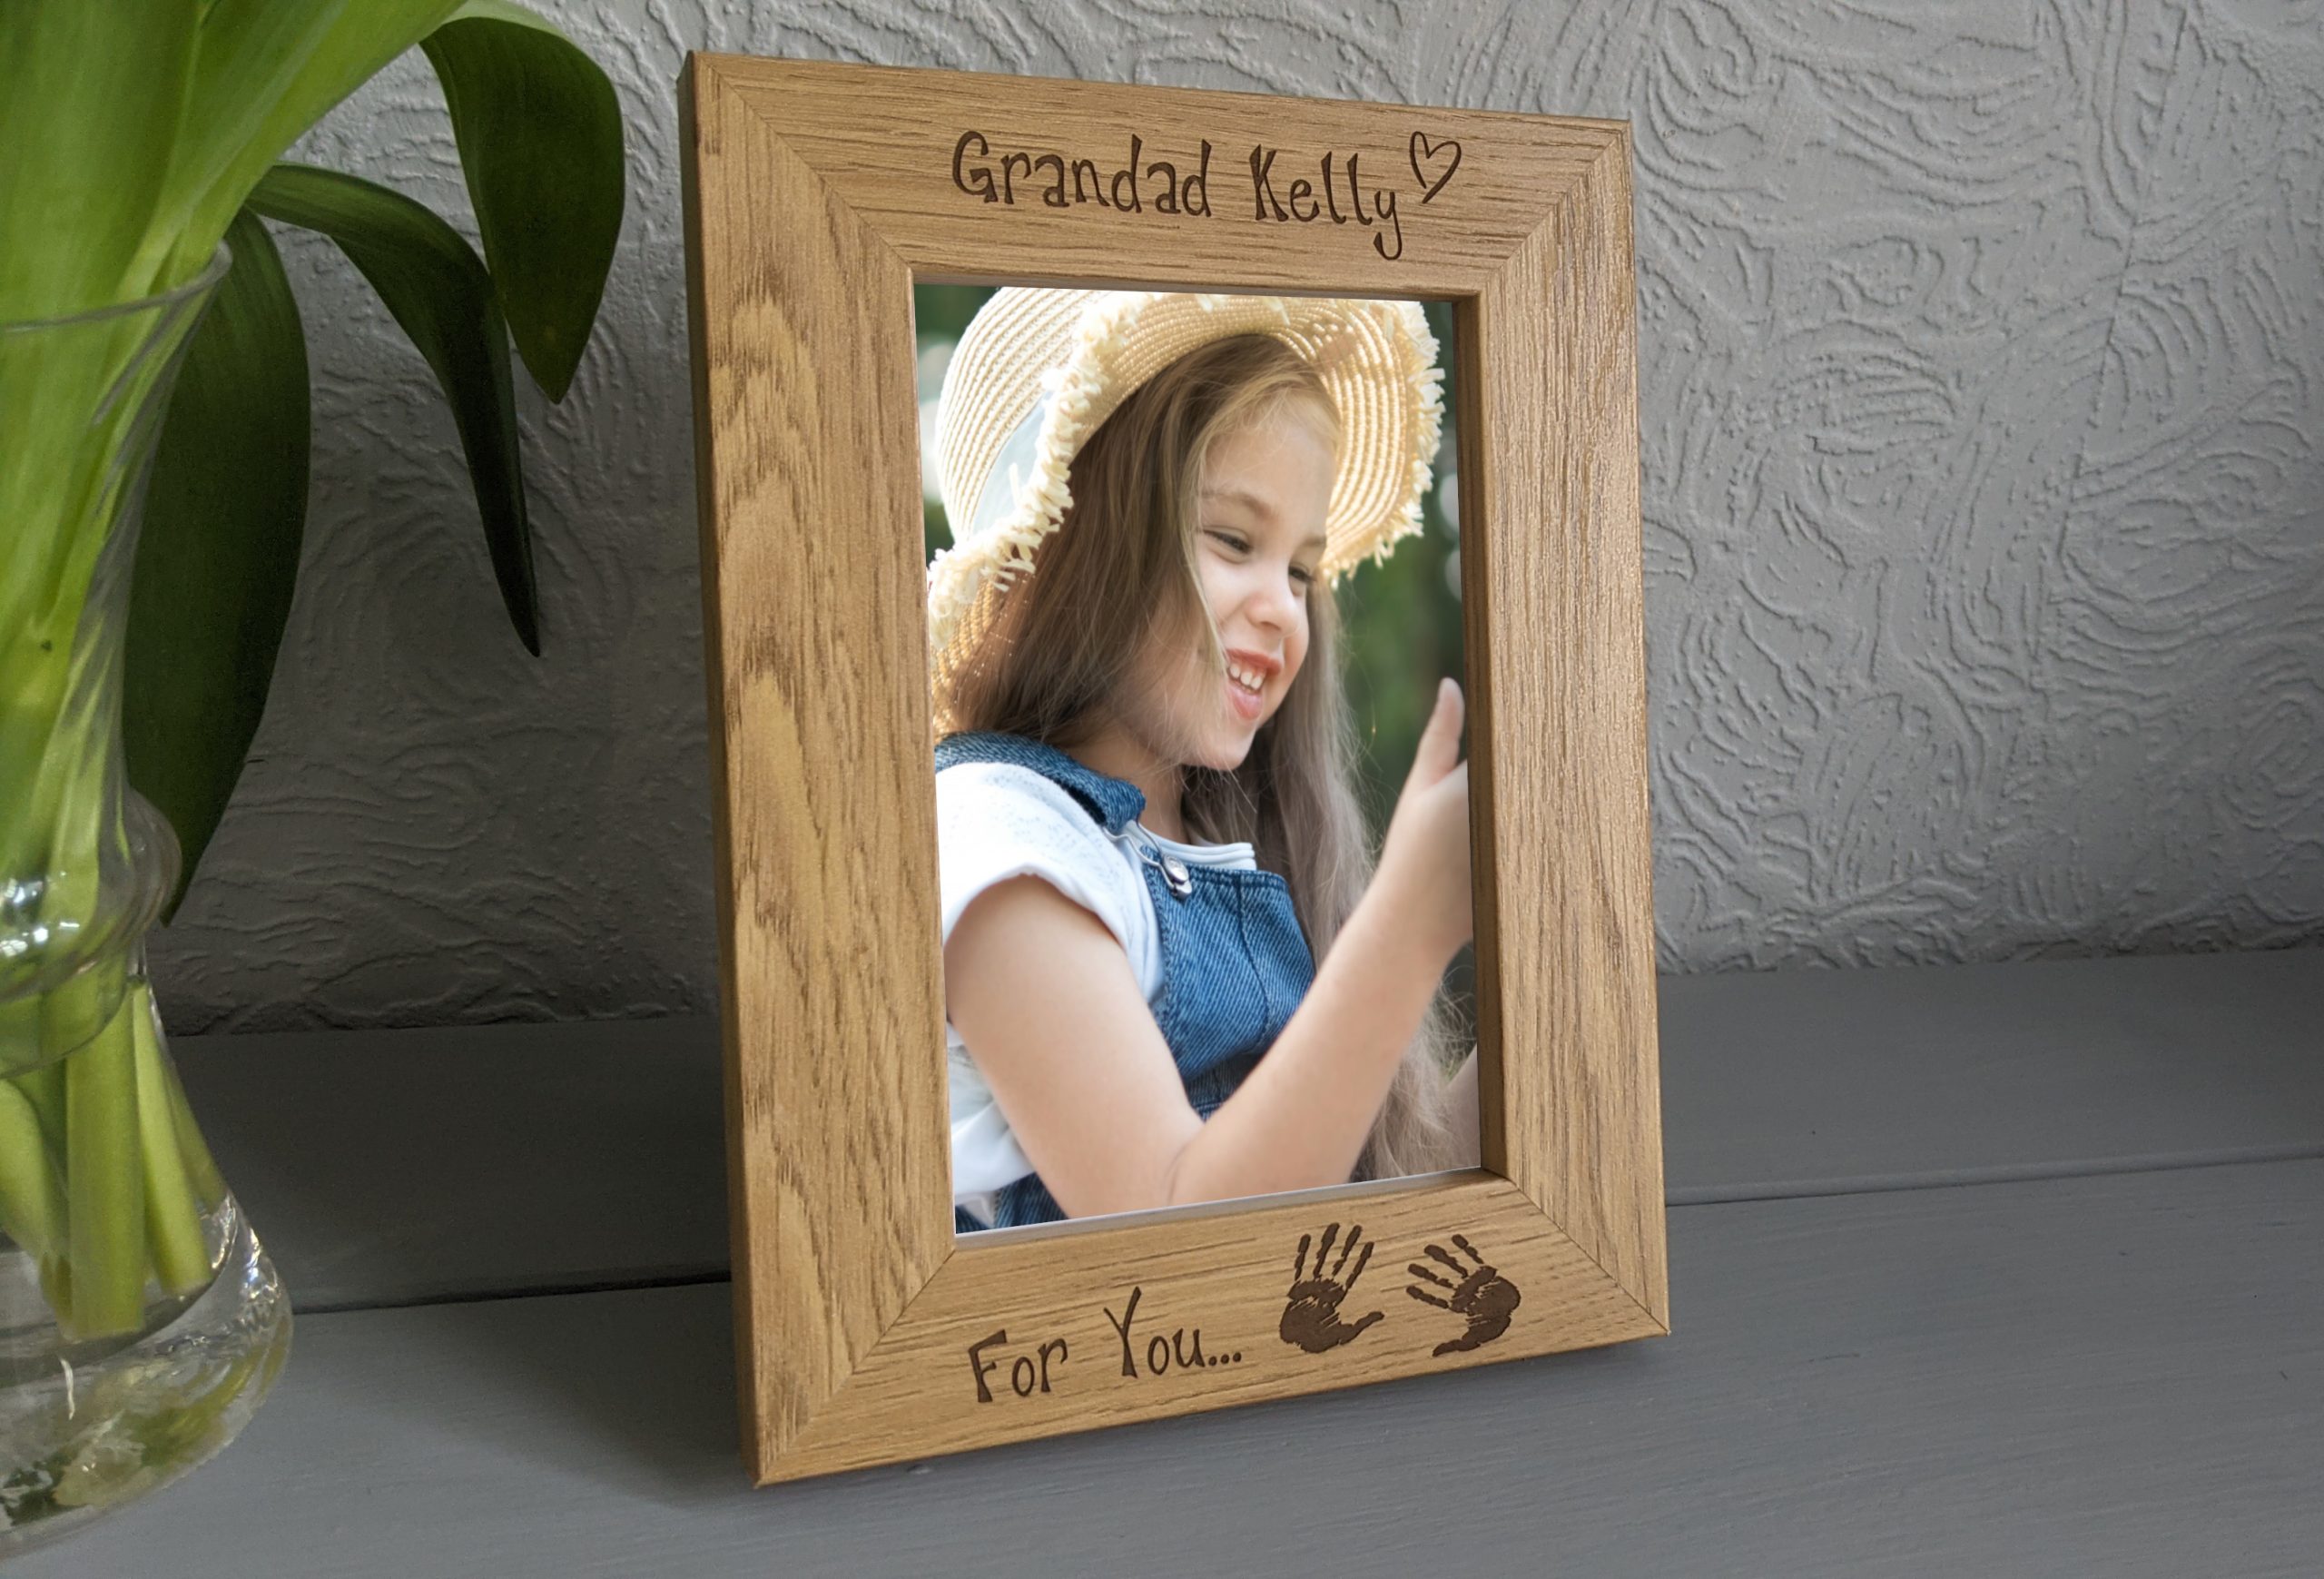 An oak veneer photograph frame. It has been personalised with text etched on the frame